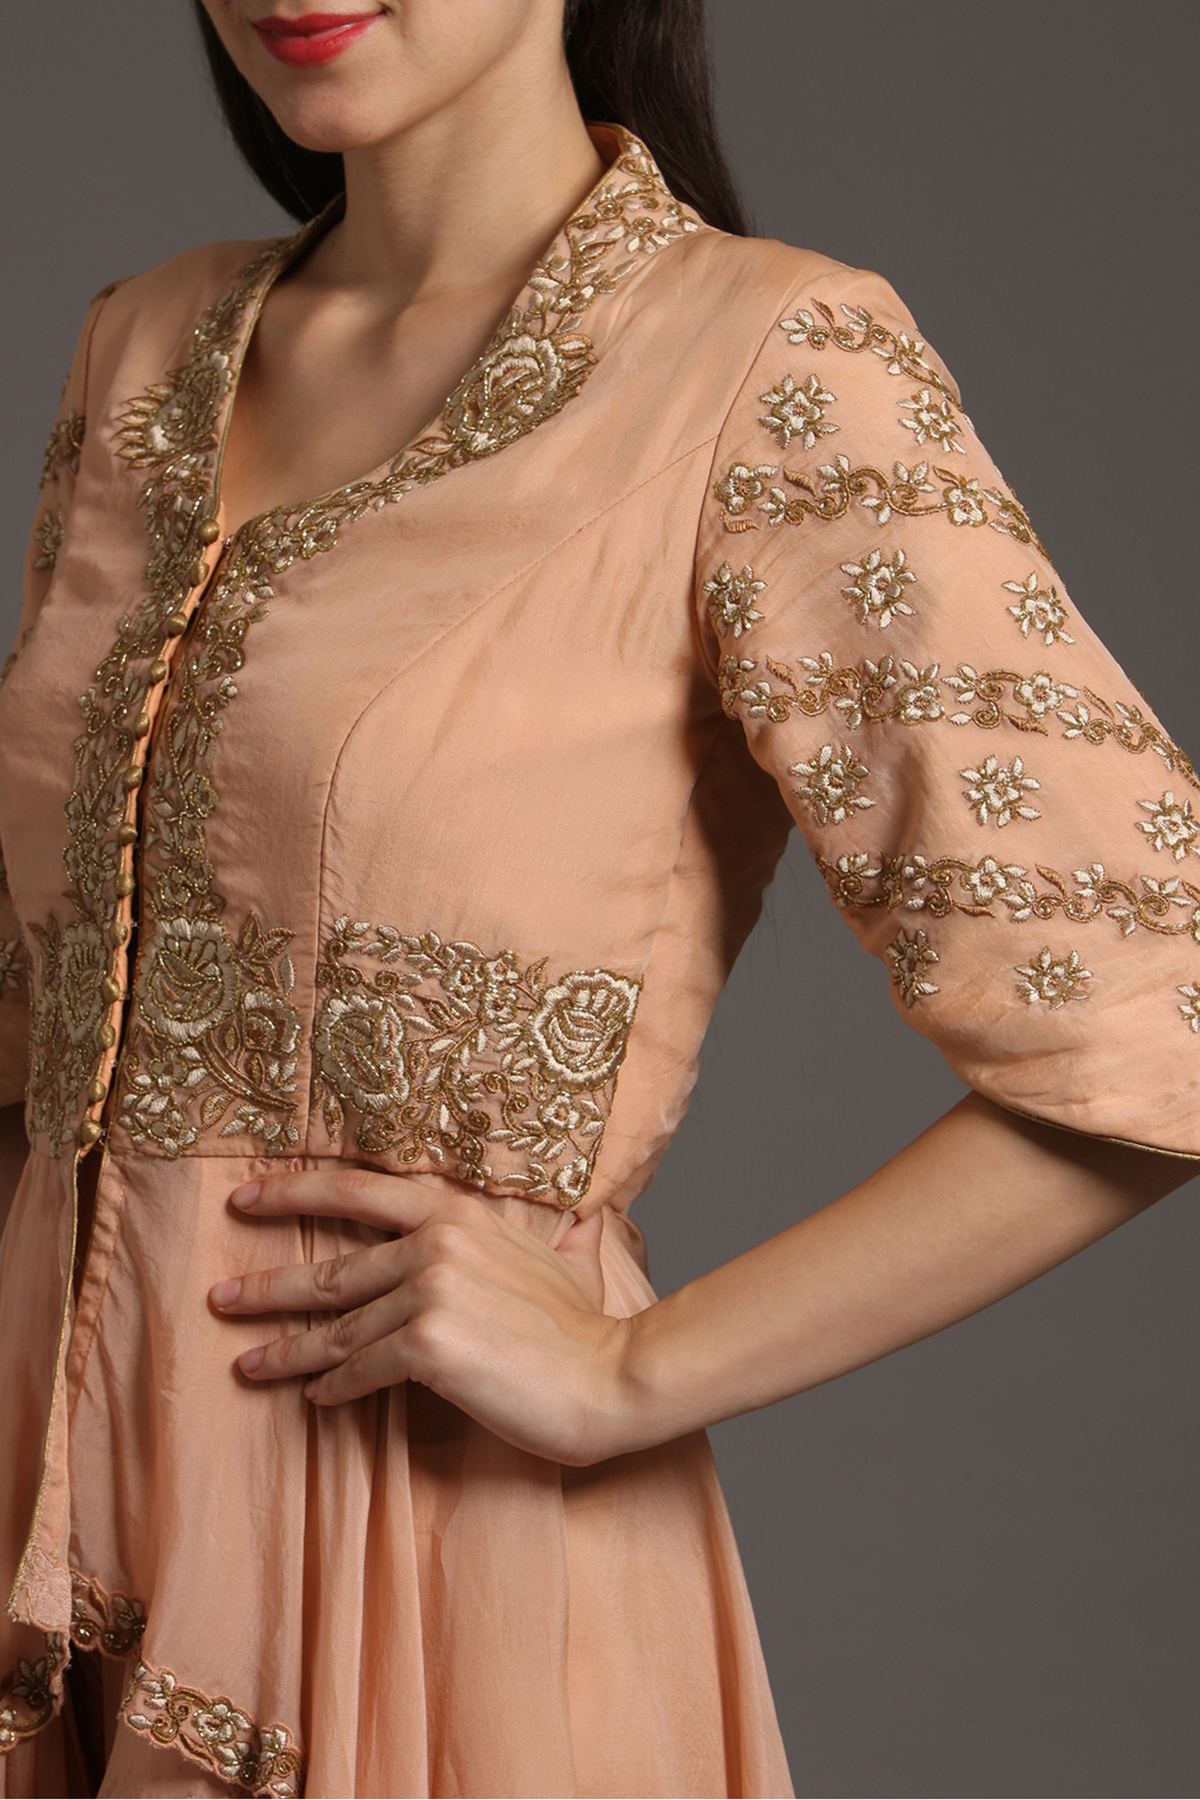 "Graceful Peach Organza Peplum Tunic with Embroidery, paired with Crepe Dhoti Pants. Embrace elegance and shop now for your special occasions."